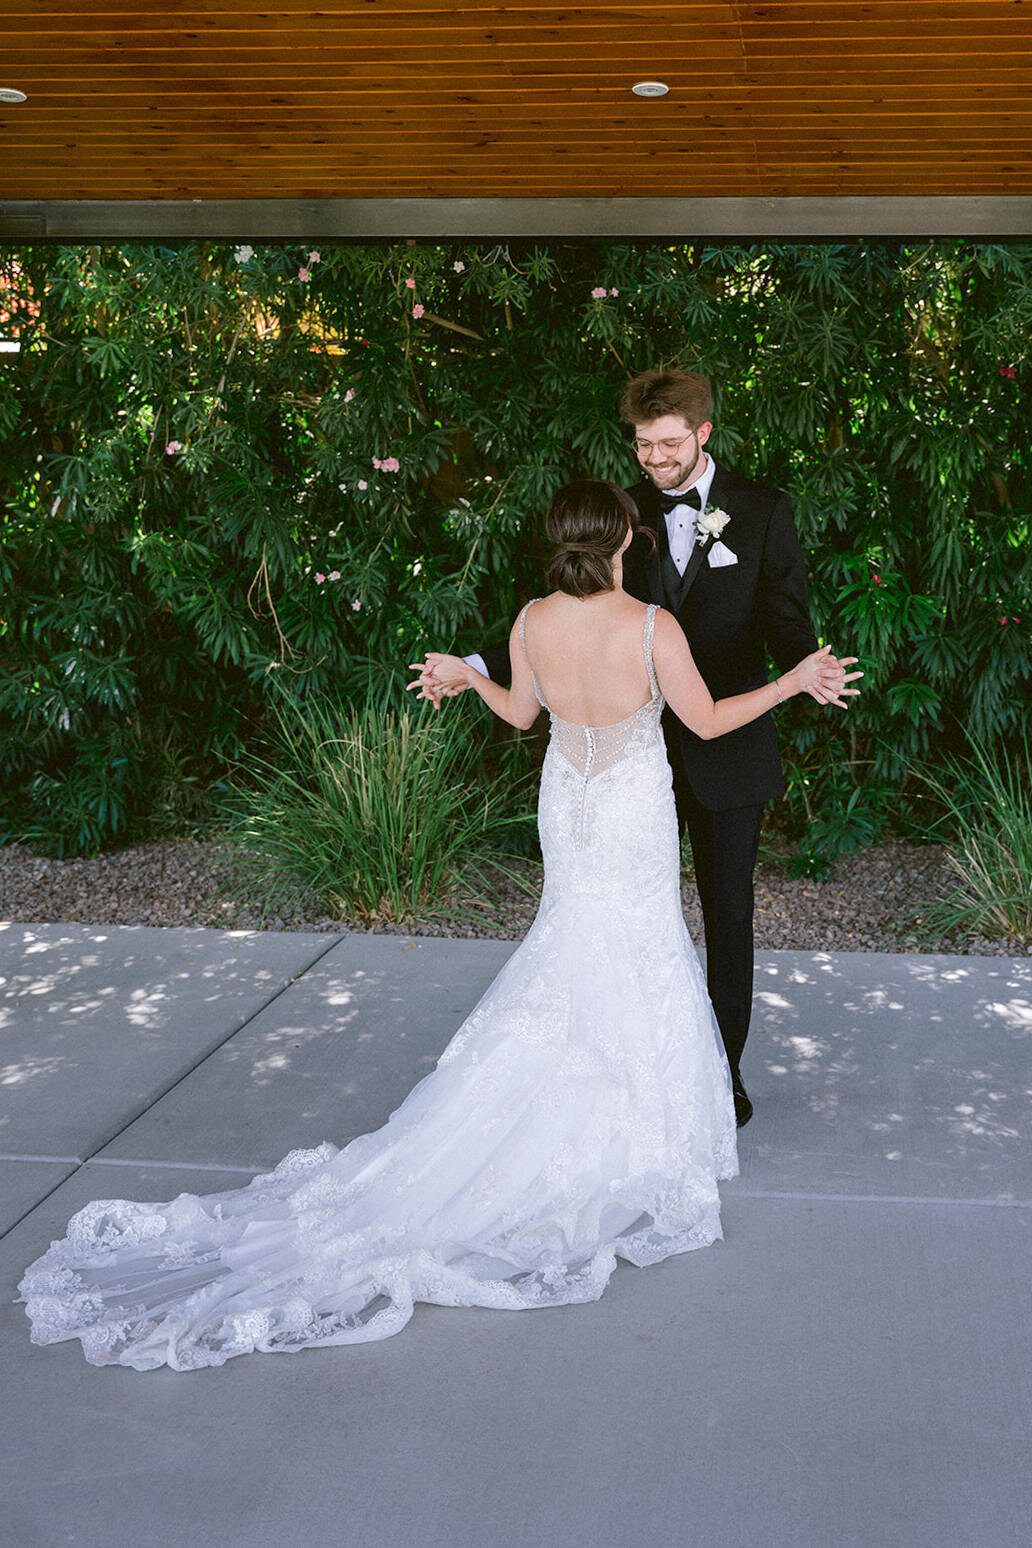 Soft and Romantic Wedding at Lotus House in Las Vegas - 13